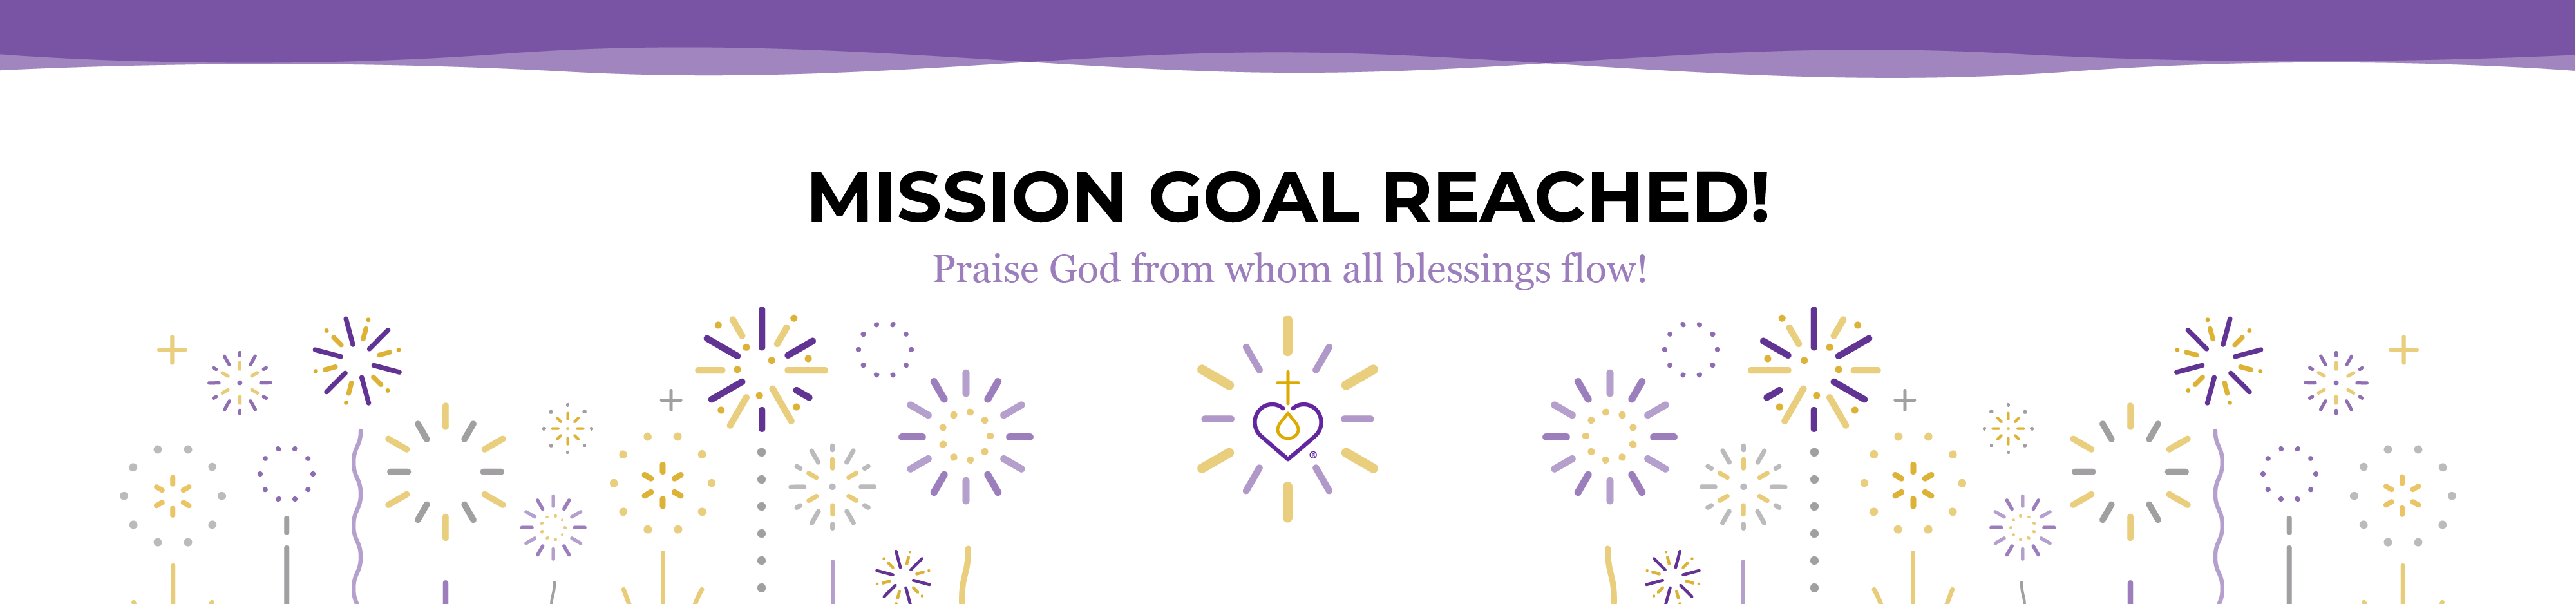 Mission Goal reached! Praise God from whom all blessings flow!